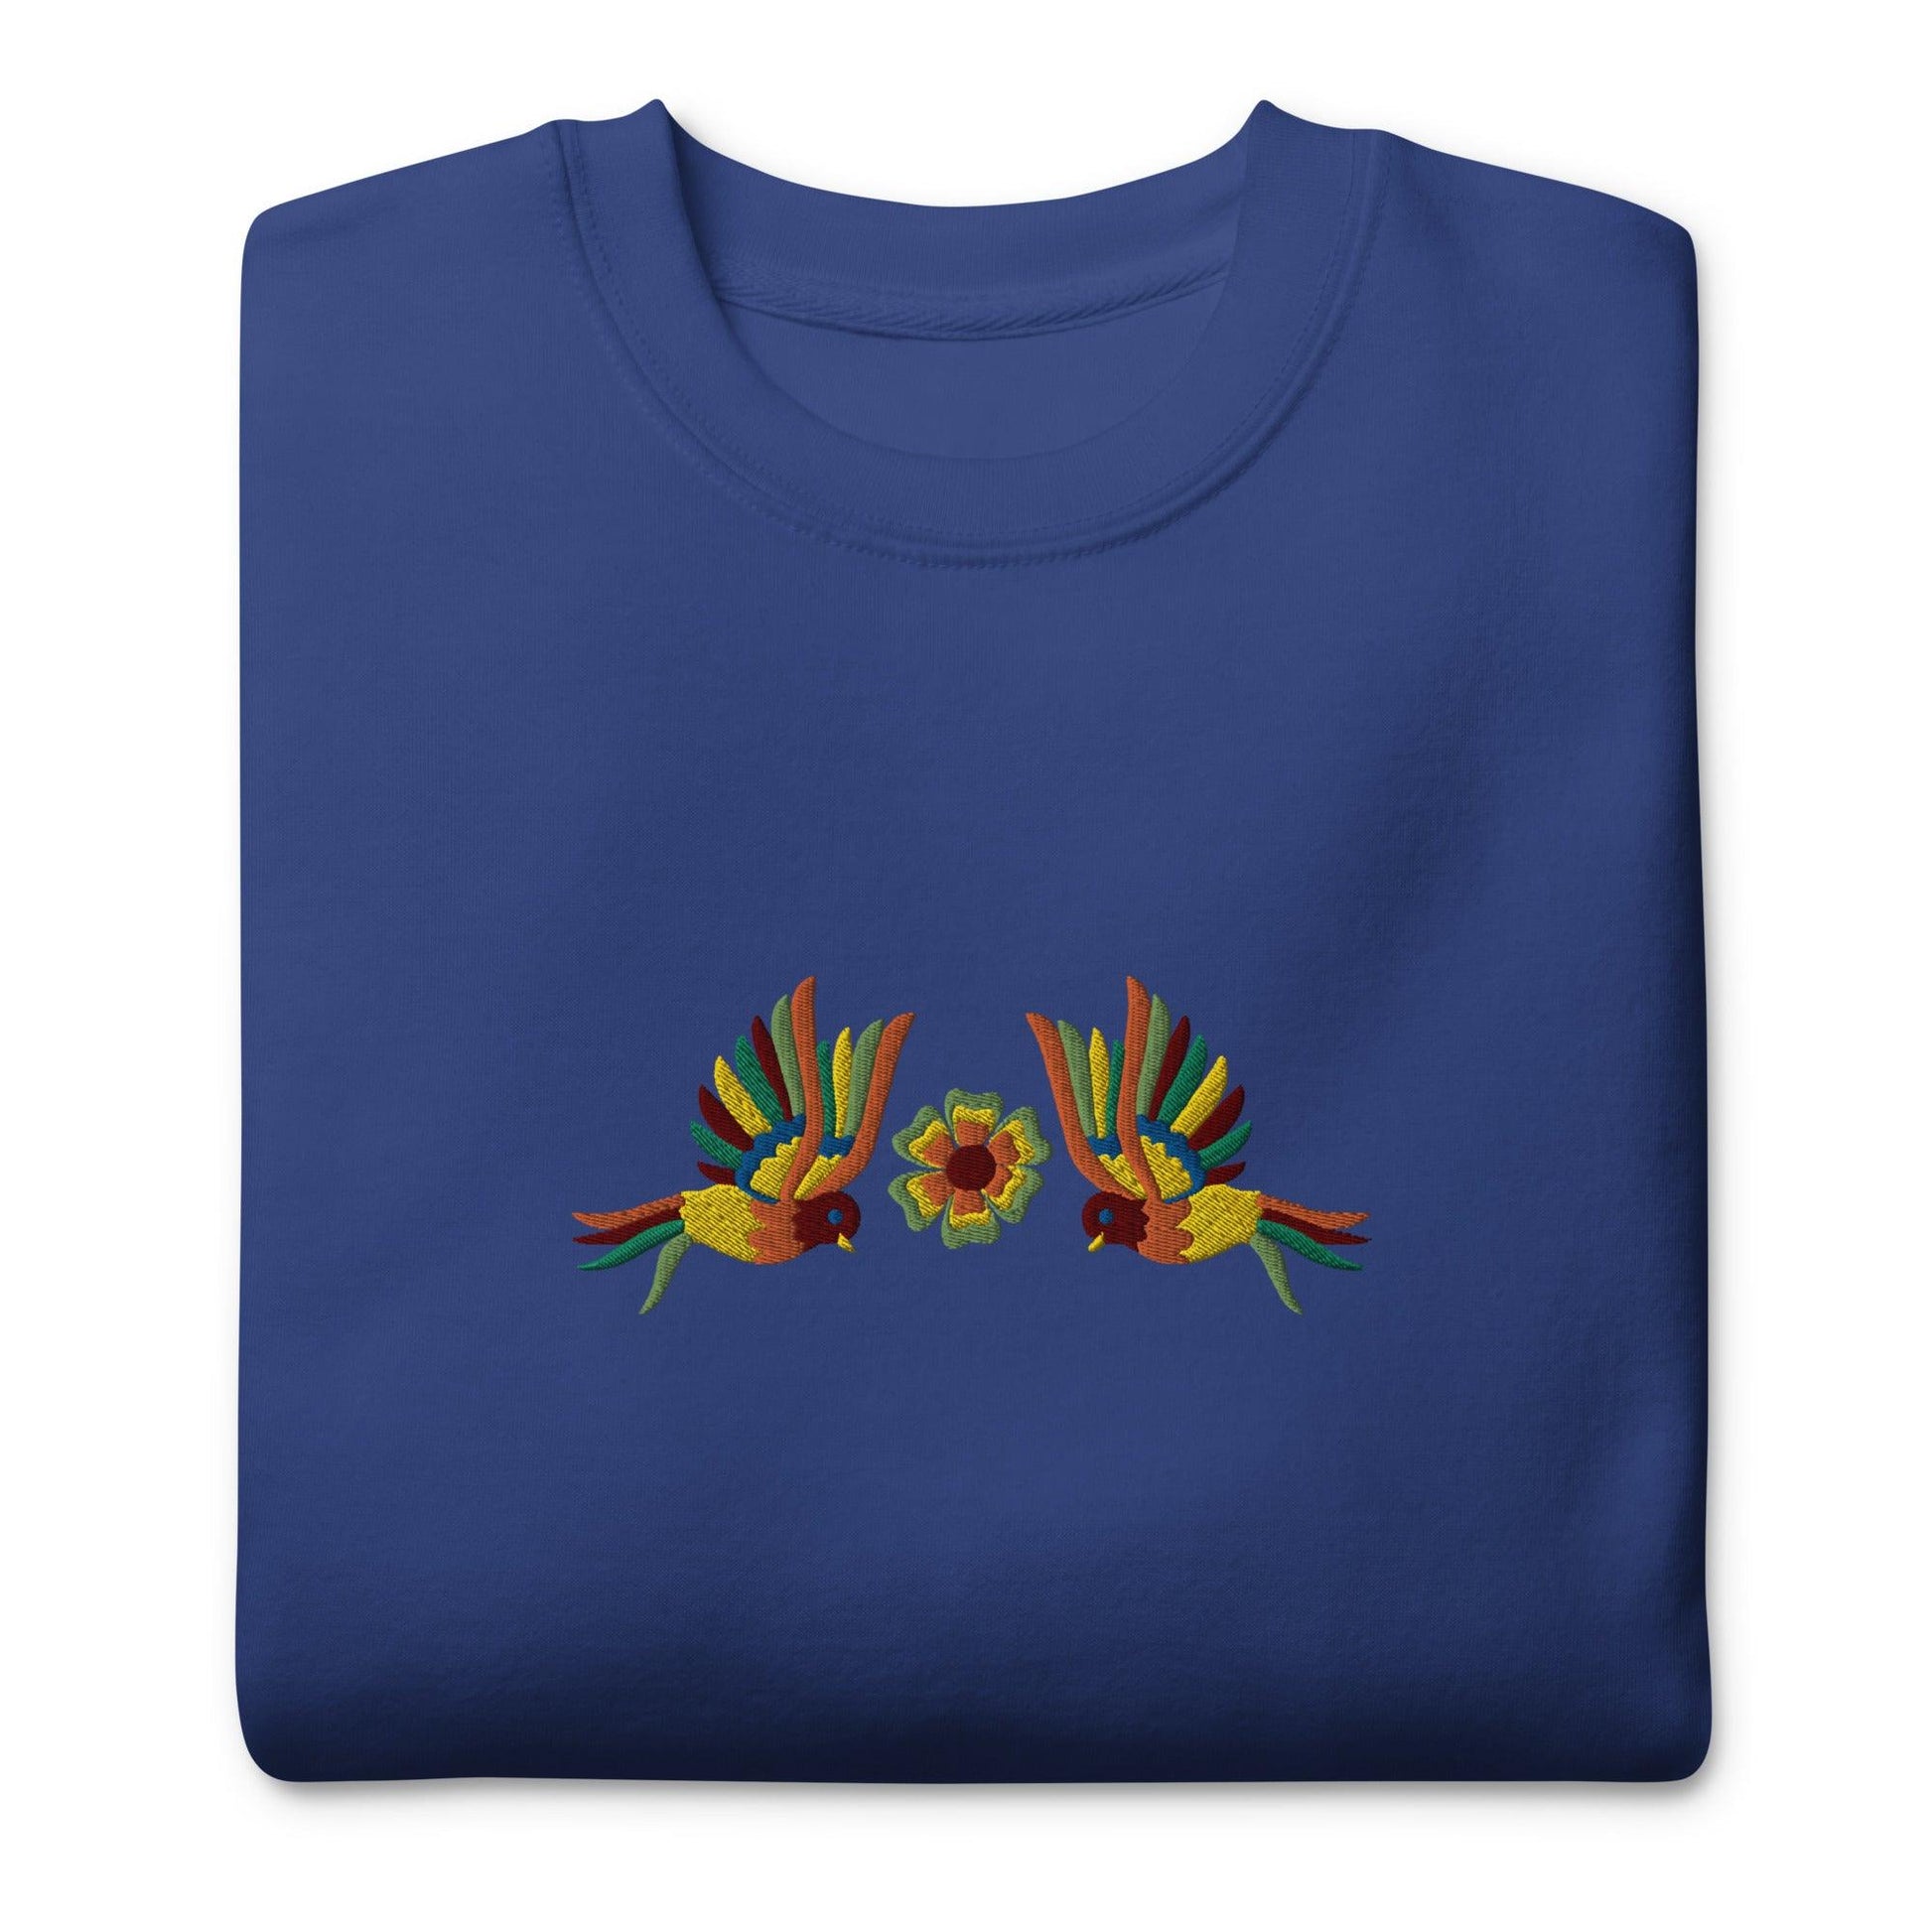 Mexican Otomi Embroidered Sweatshirt - The Global Wanderer